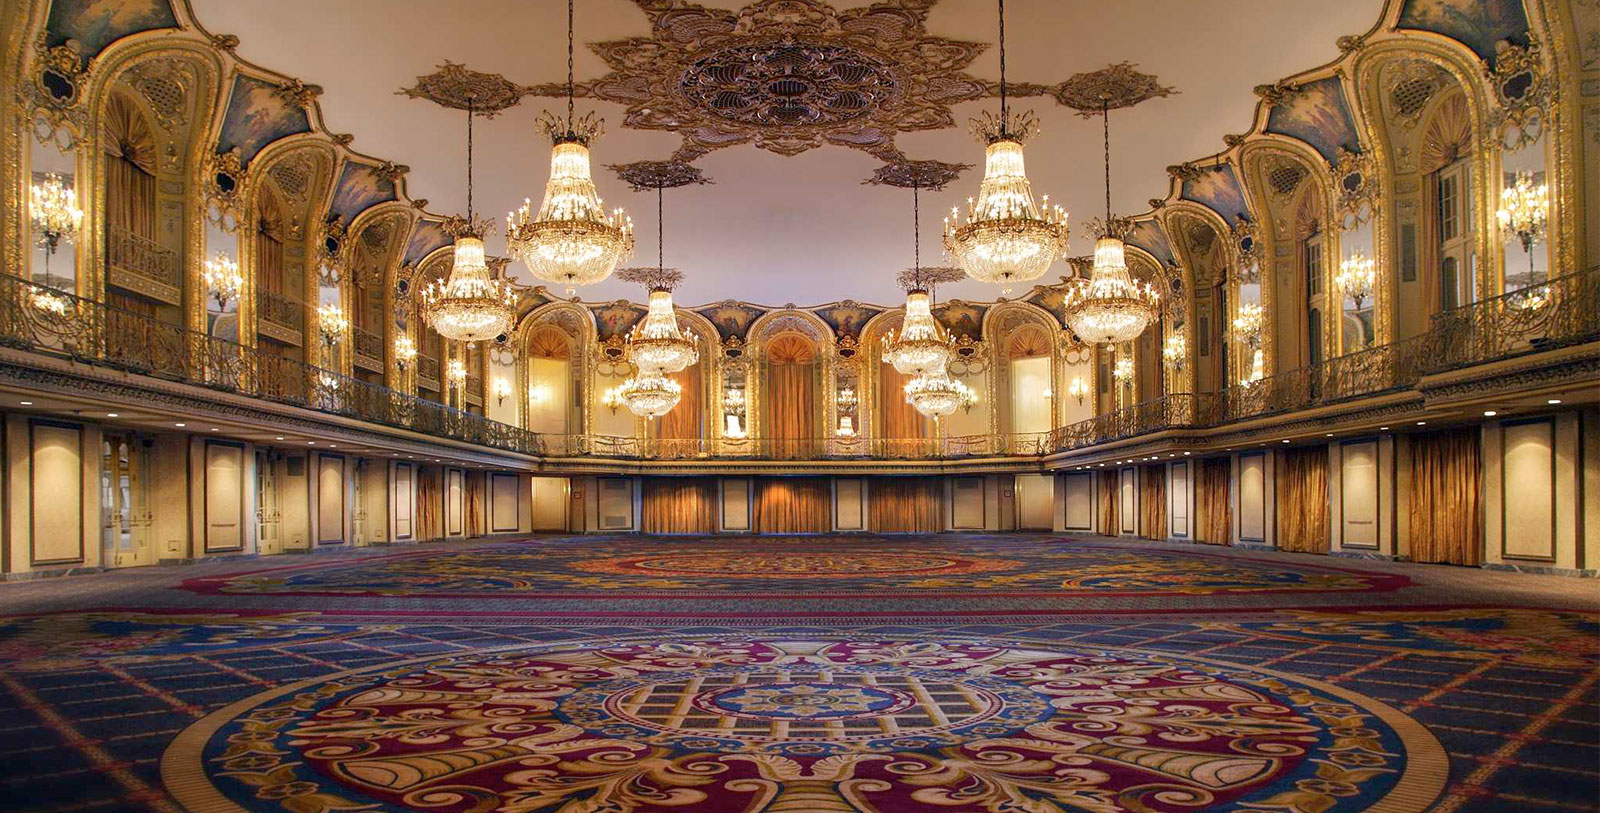 Image of Grand ballroom, Hilton Chicago, 1927, Member of Historic Hotels of America, in Chicago, Illinois, Weddings